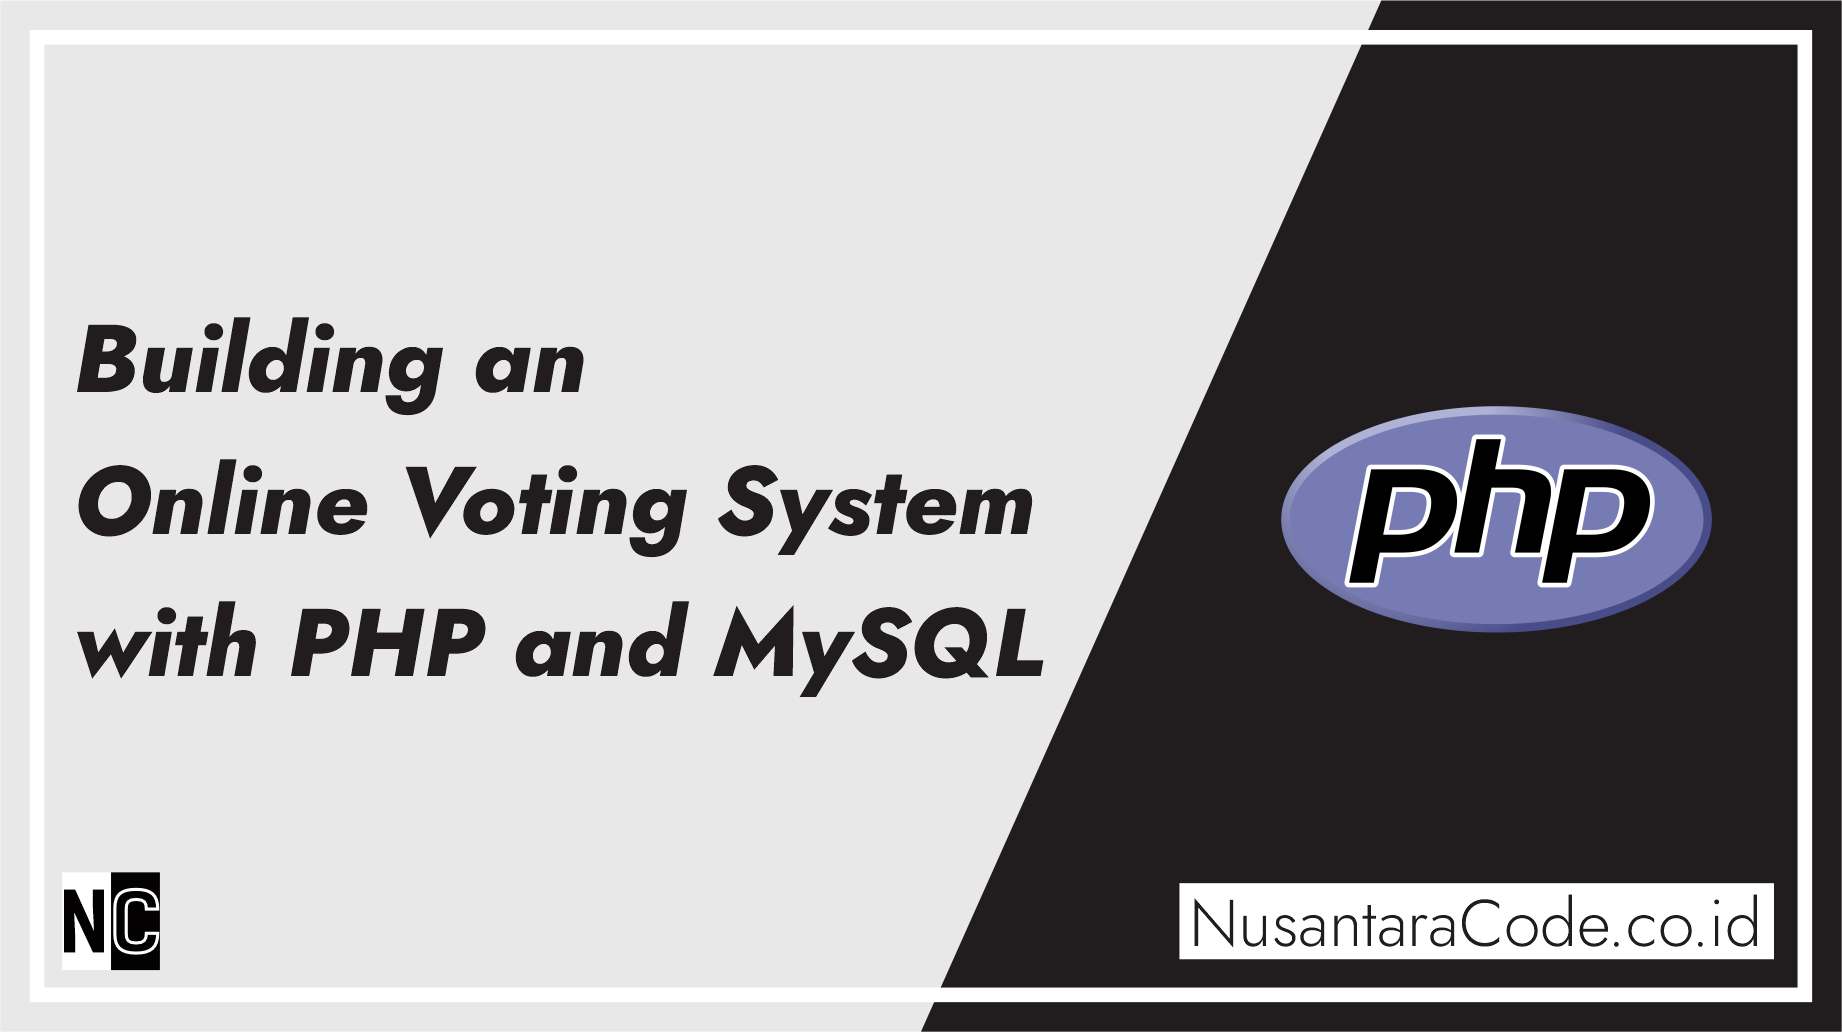 Building an Online Voting System with PHP and MySQL